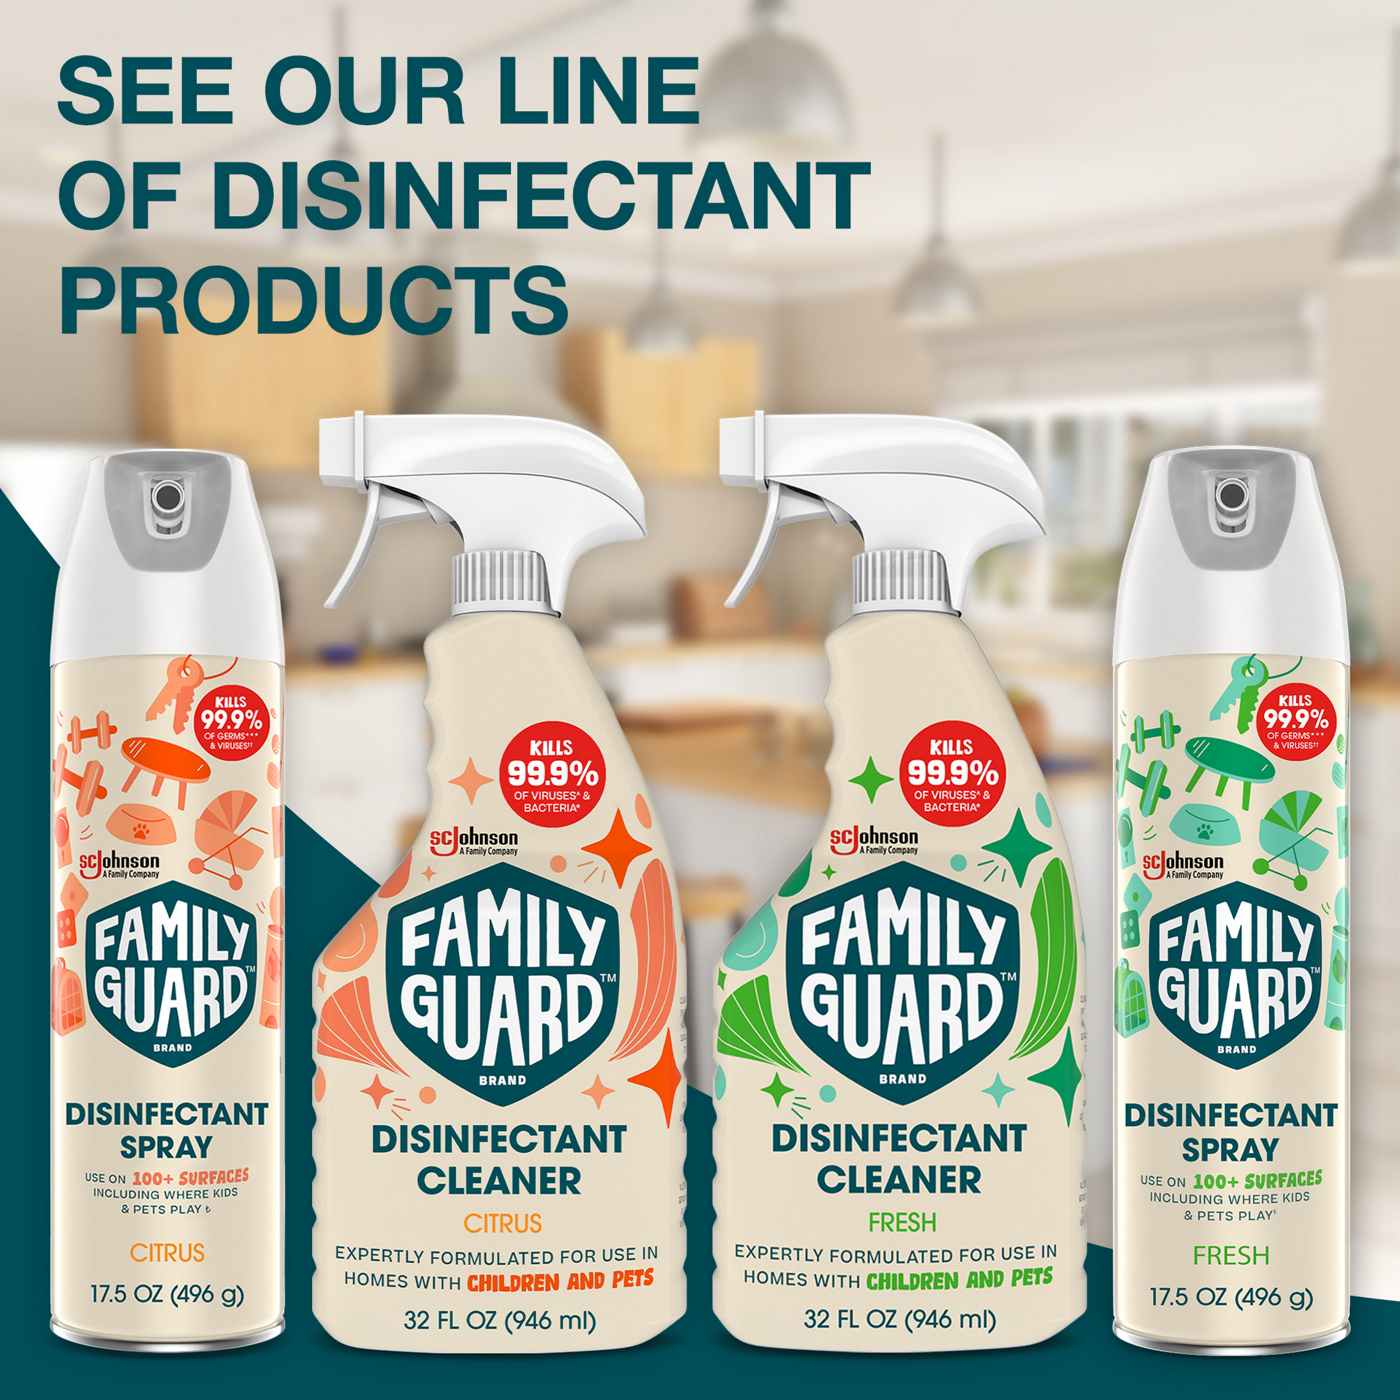 Family Guard Citrus Disinfectant Cleaner; image 8 of 10